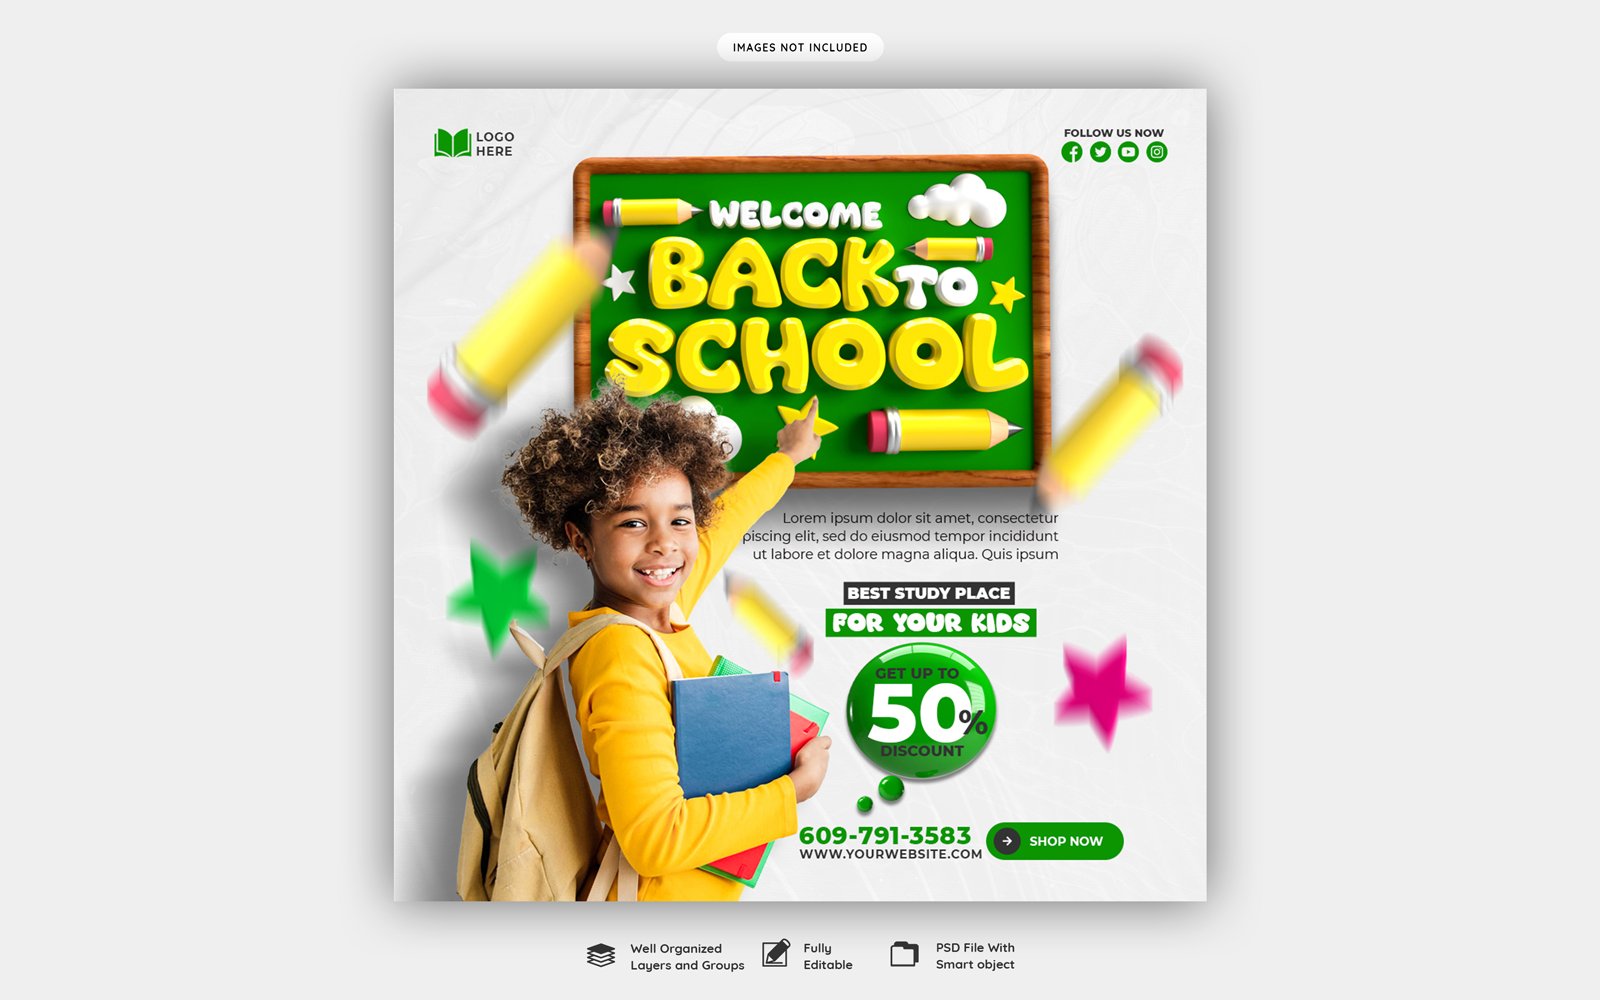 Welcome Back To School Social Media Post PSD Template Design